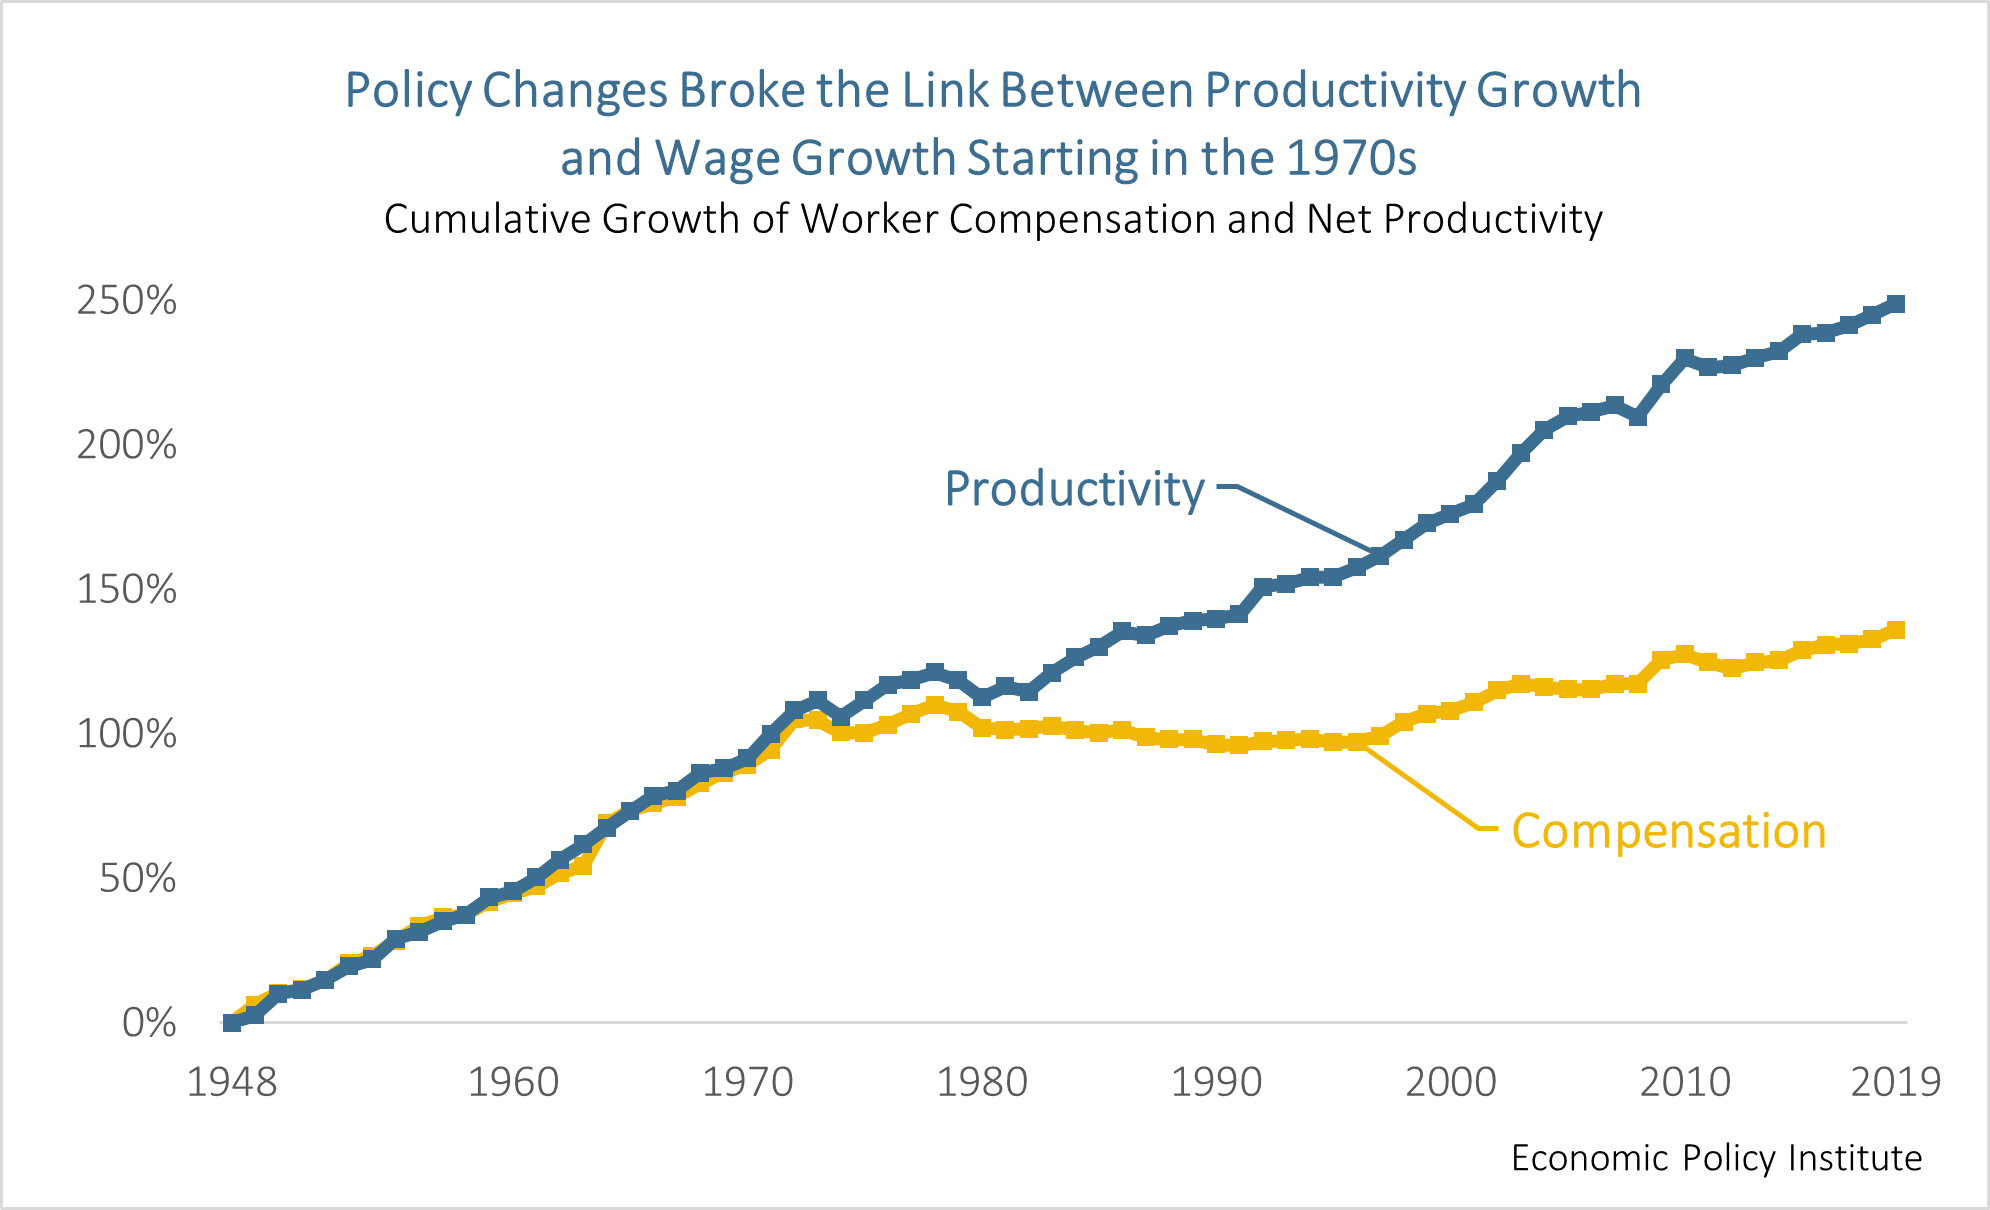 Line chart: Policy changes broke the link between productivity growth and wage growth starting in the 1970s